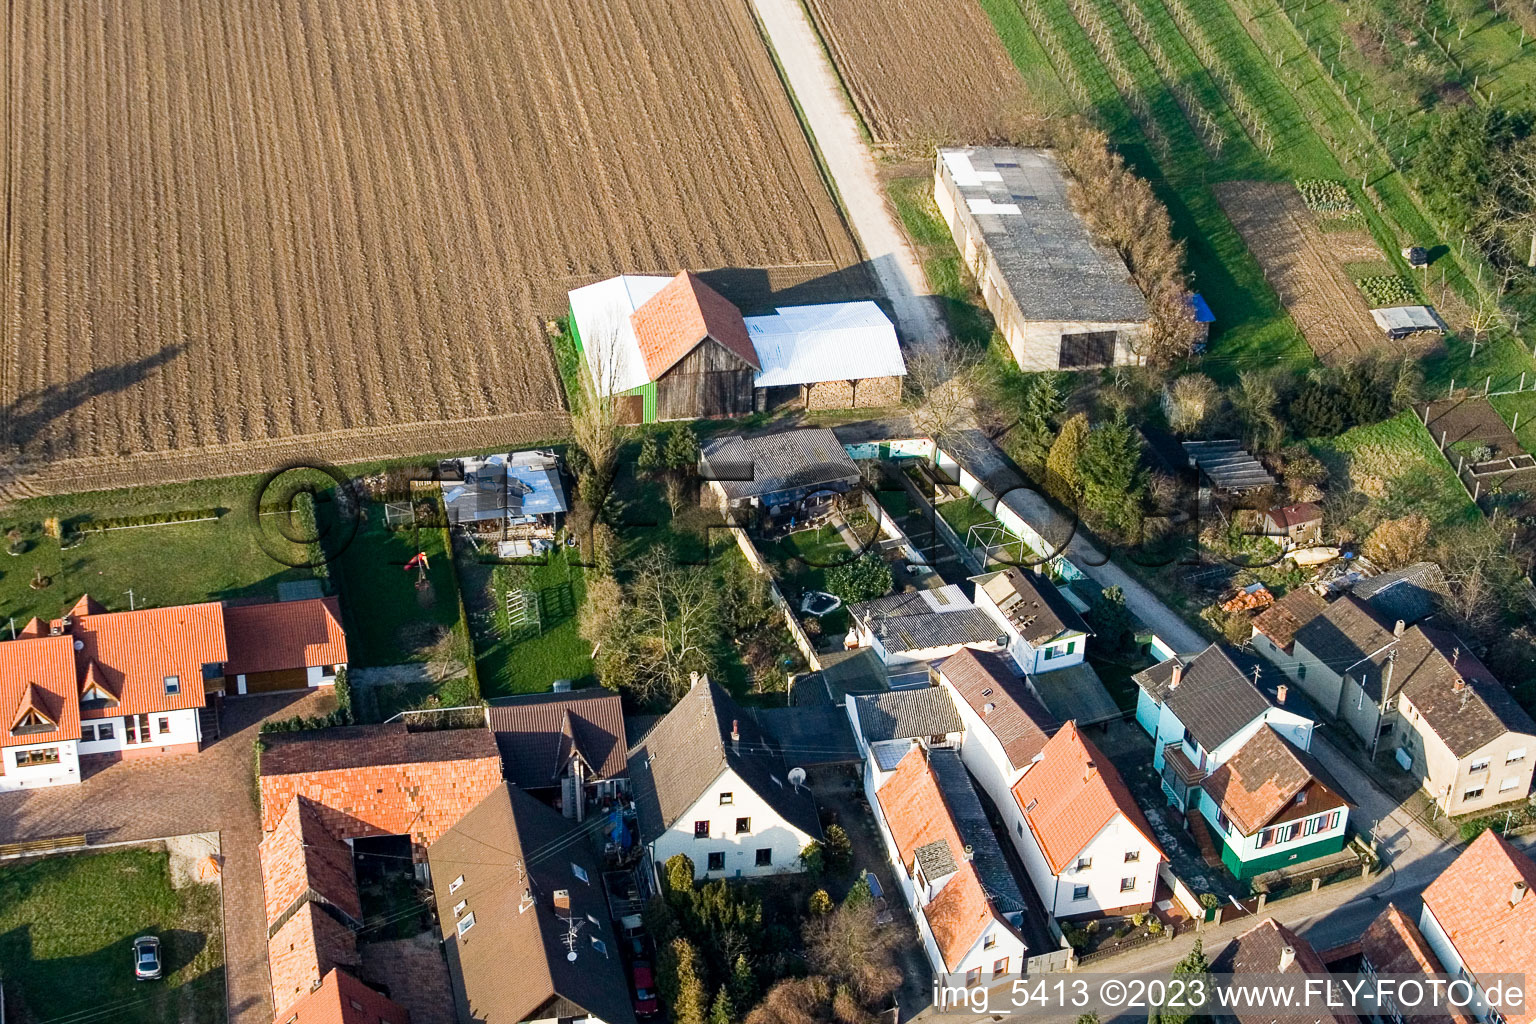 Saarstrasse NW in Kandel in the state Rhineland-Palatinate, Germany seen from above